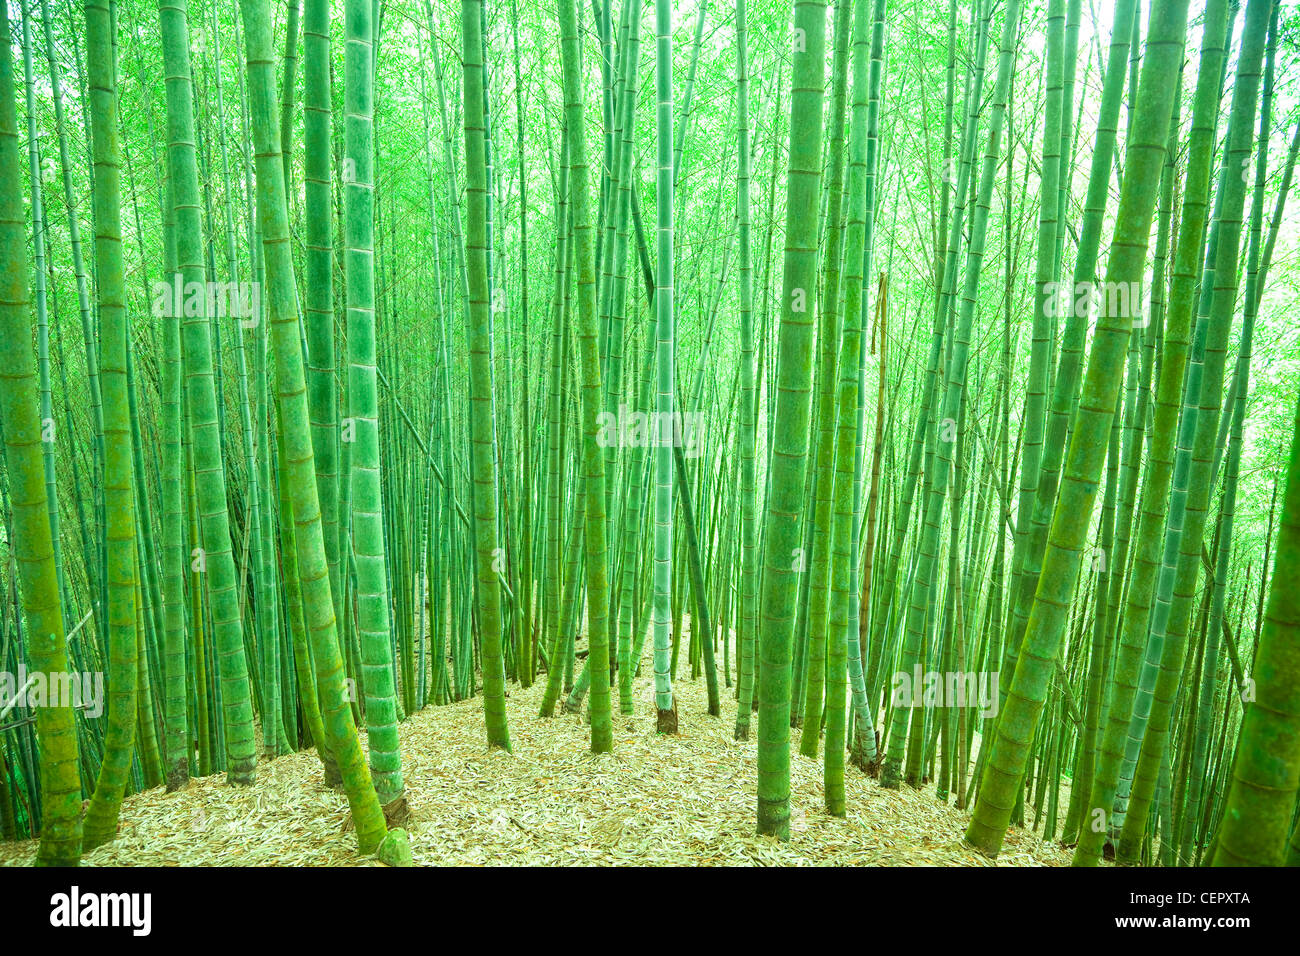 green bamboo forest Stock Photo